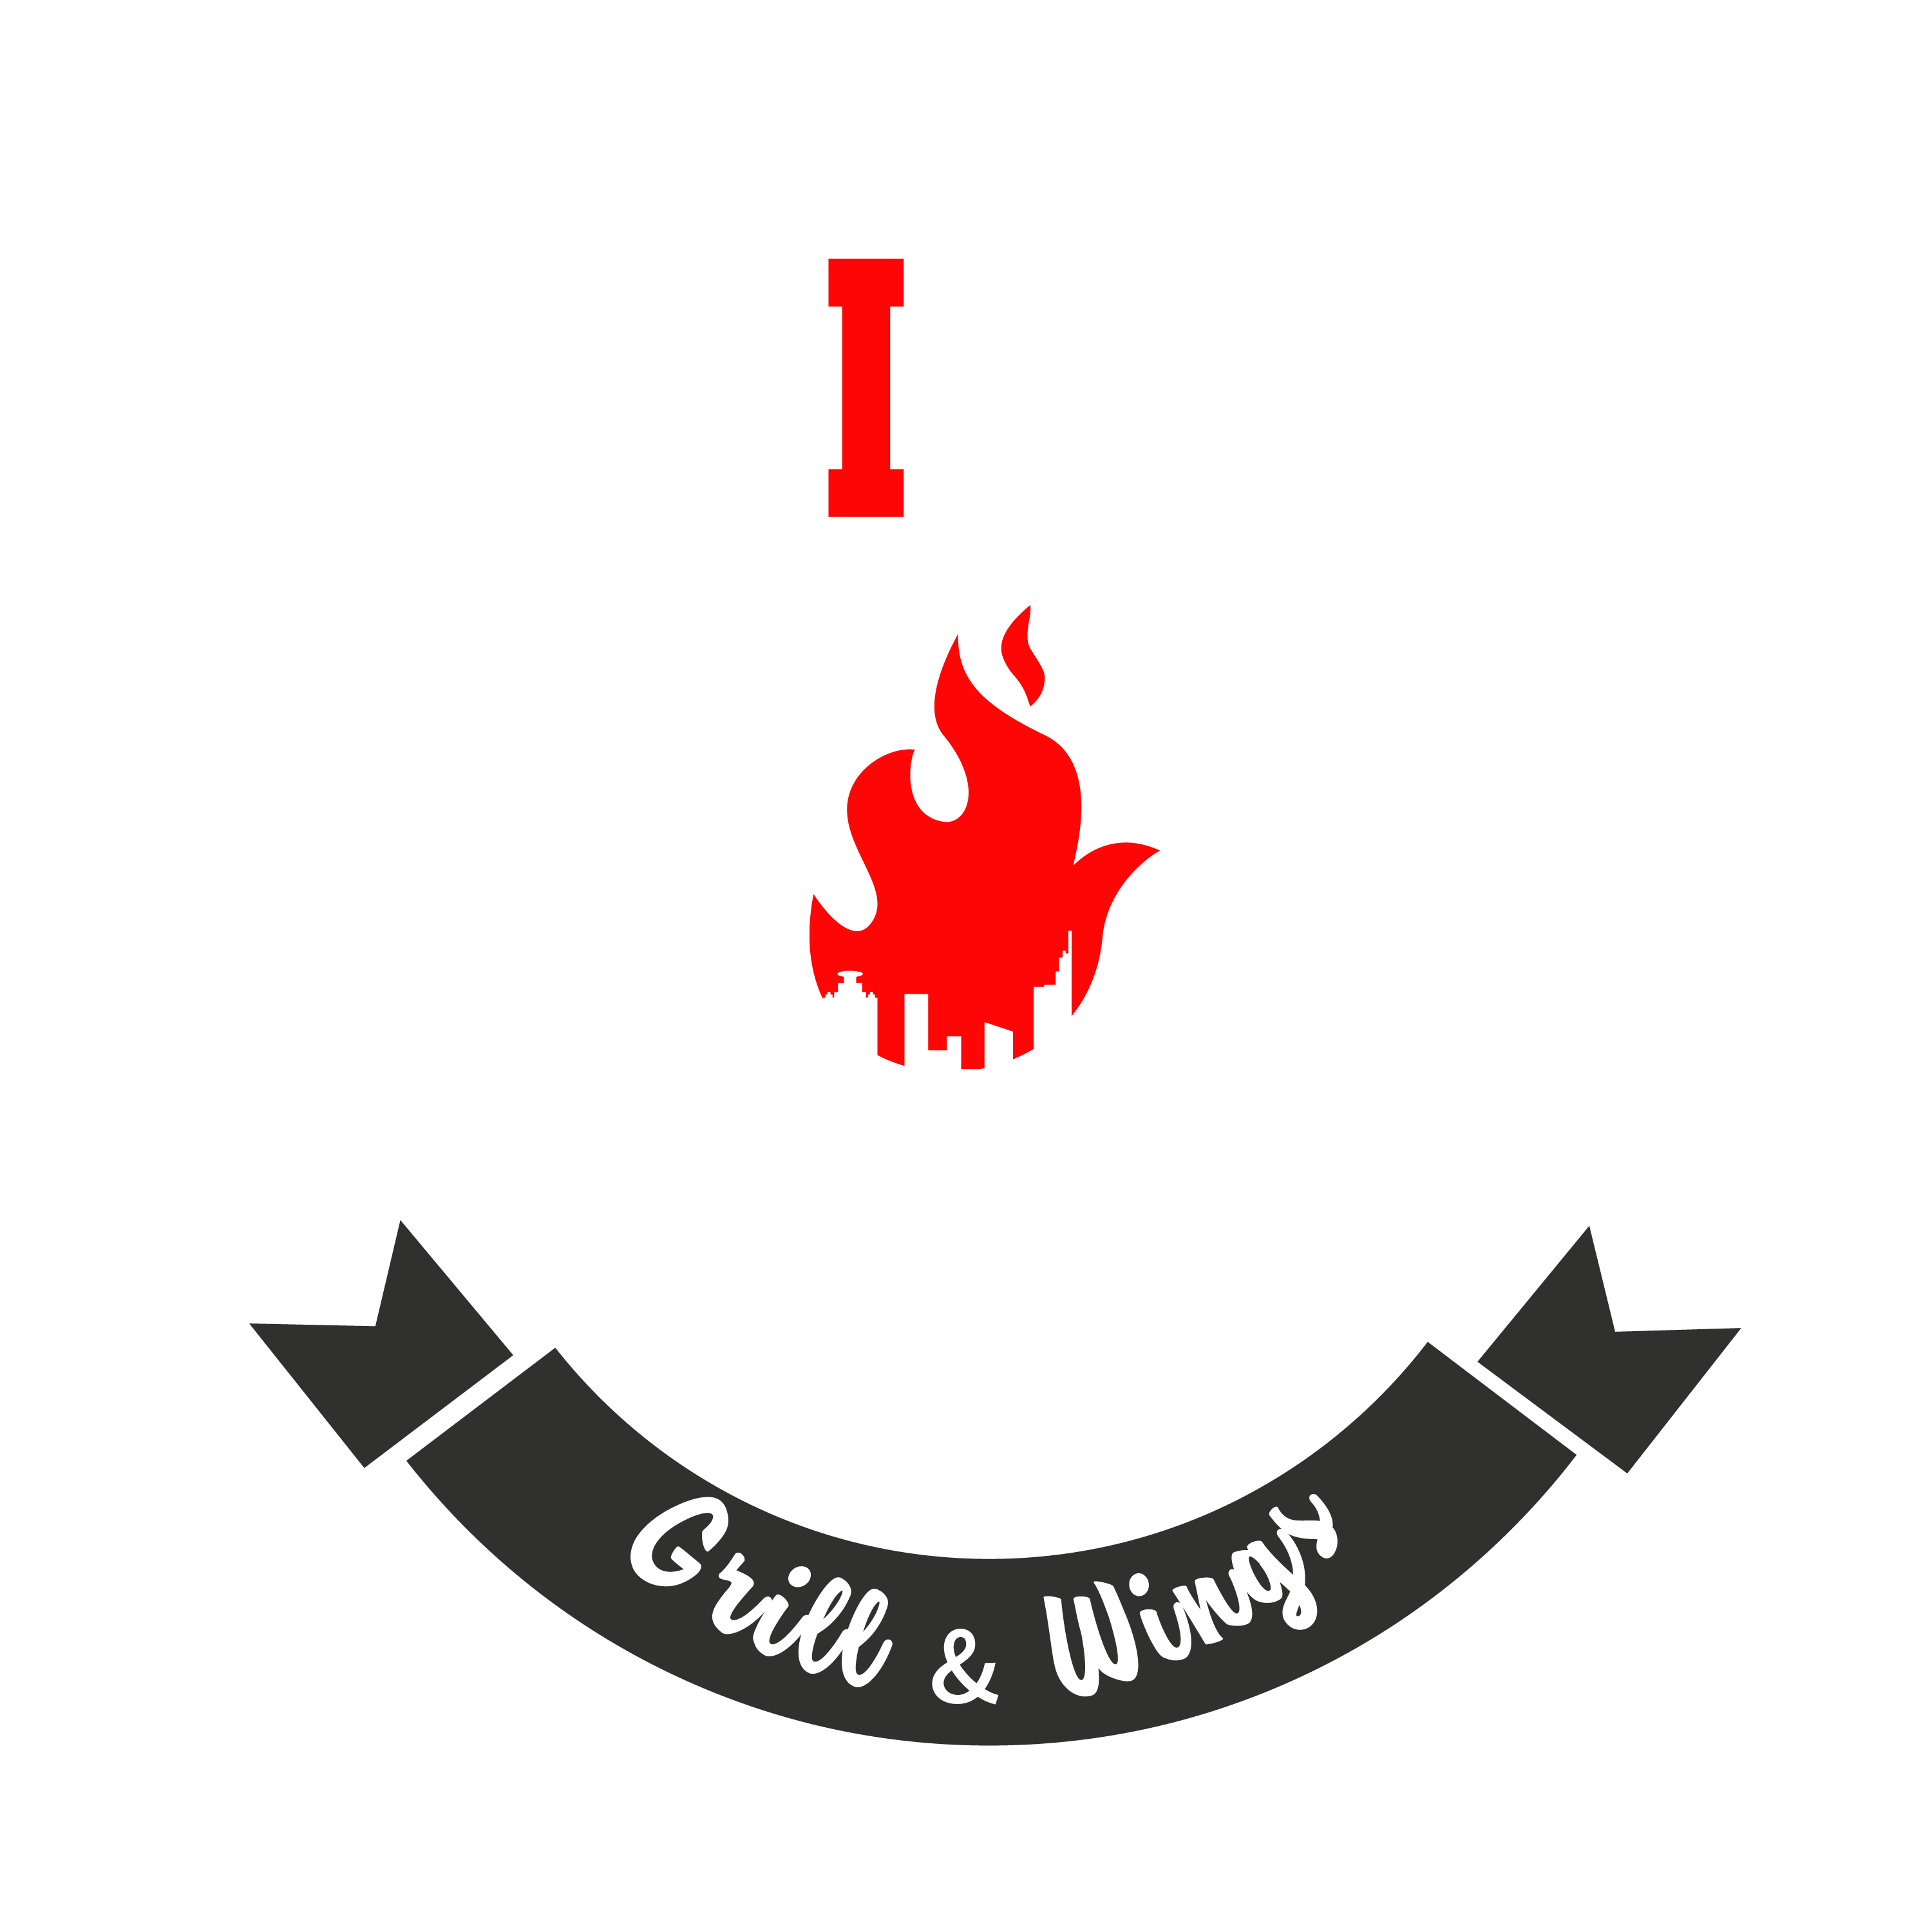 CITY GRILL & WINGS